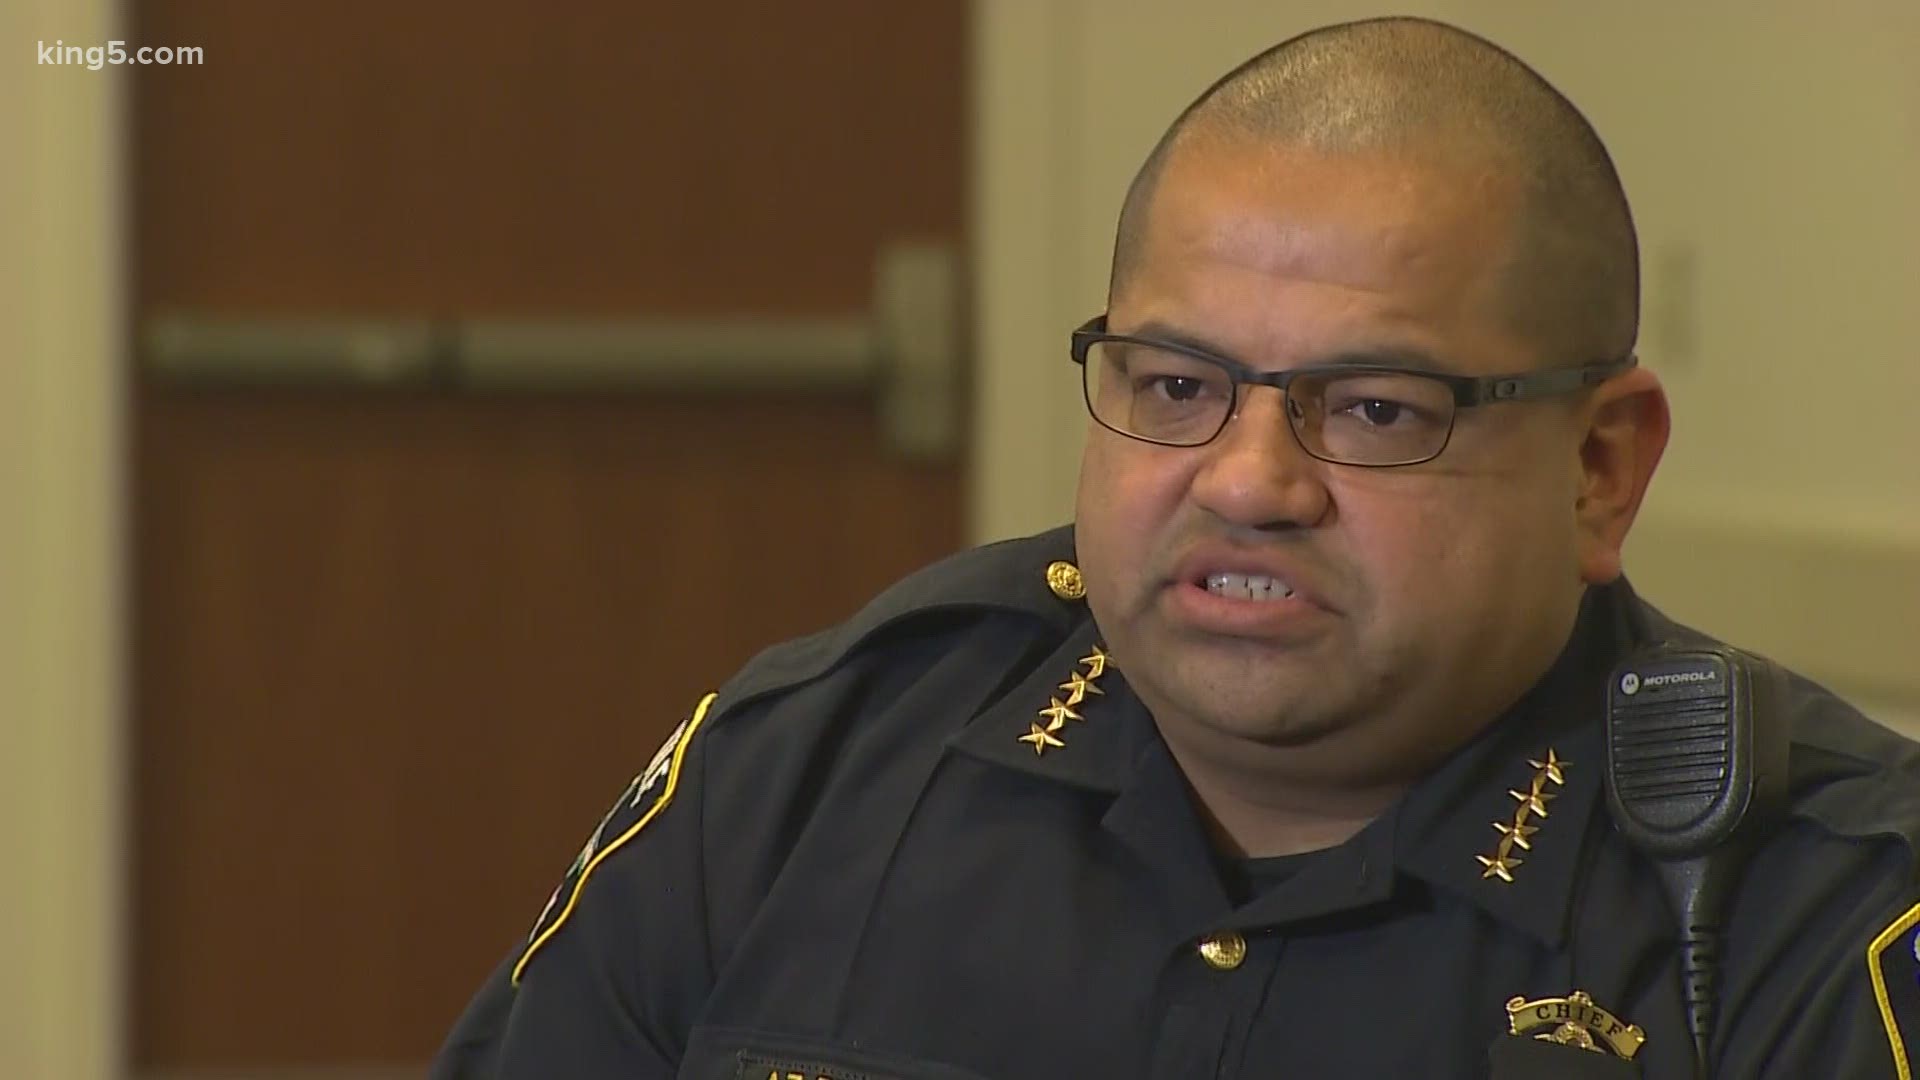 SPD Interim Chief Diaz discussed police funding, leadership and reforms in the department.